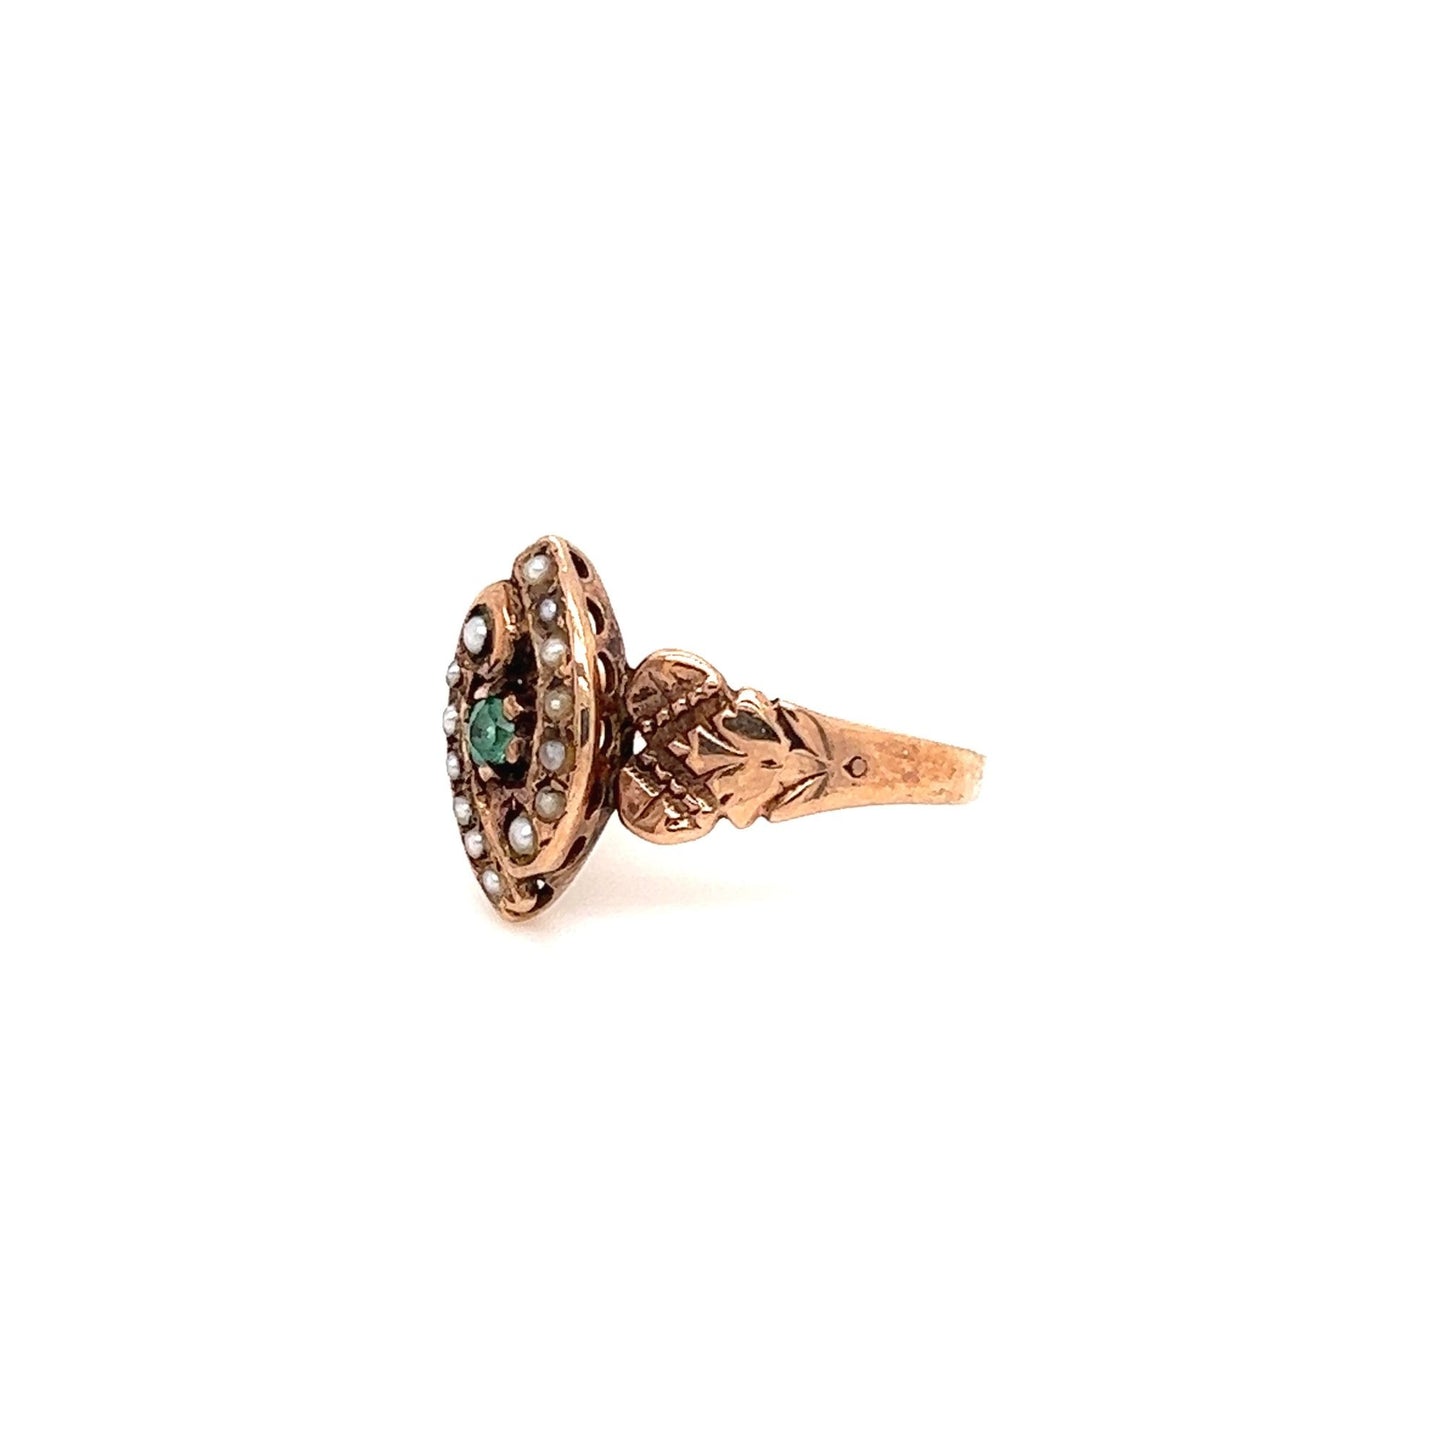 Vintage Art Deco 14k Rose Gold Ring w/ a 0.15ct. Emerald and Pearls